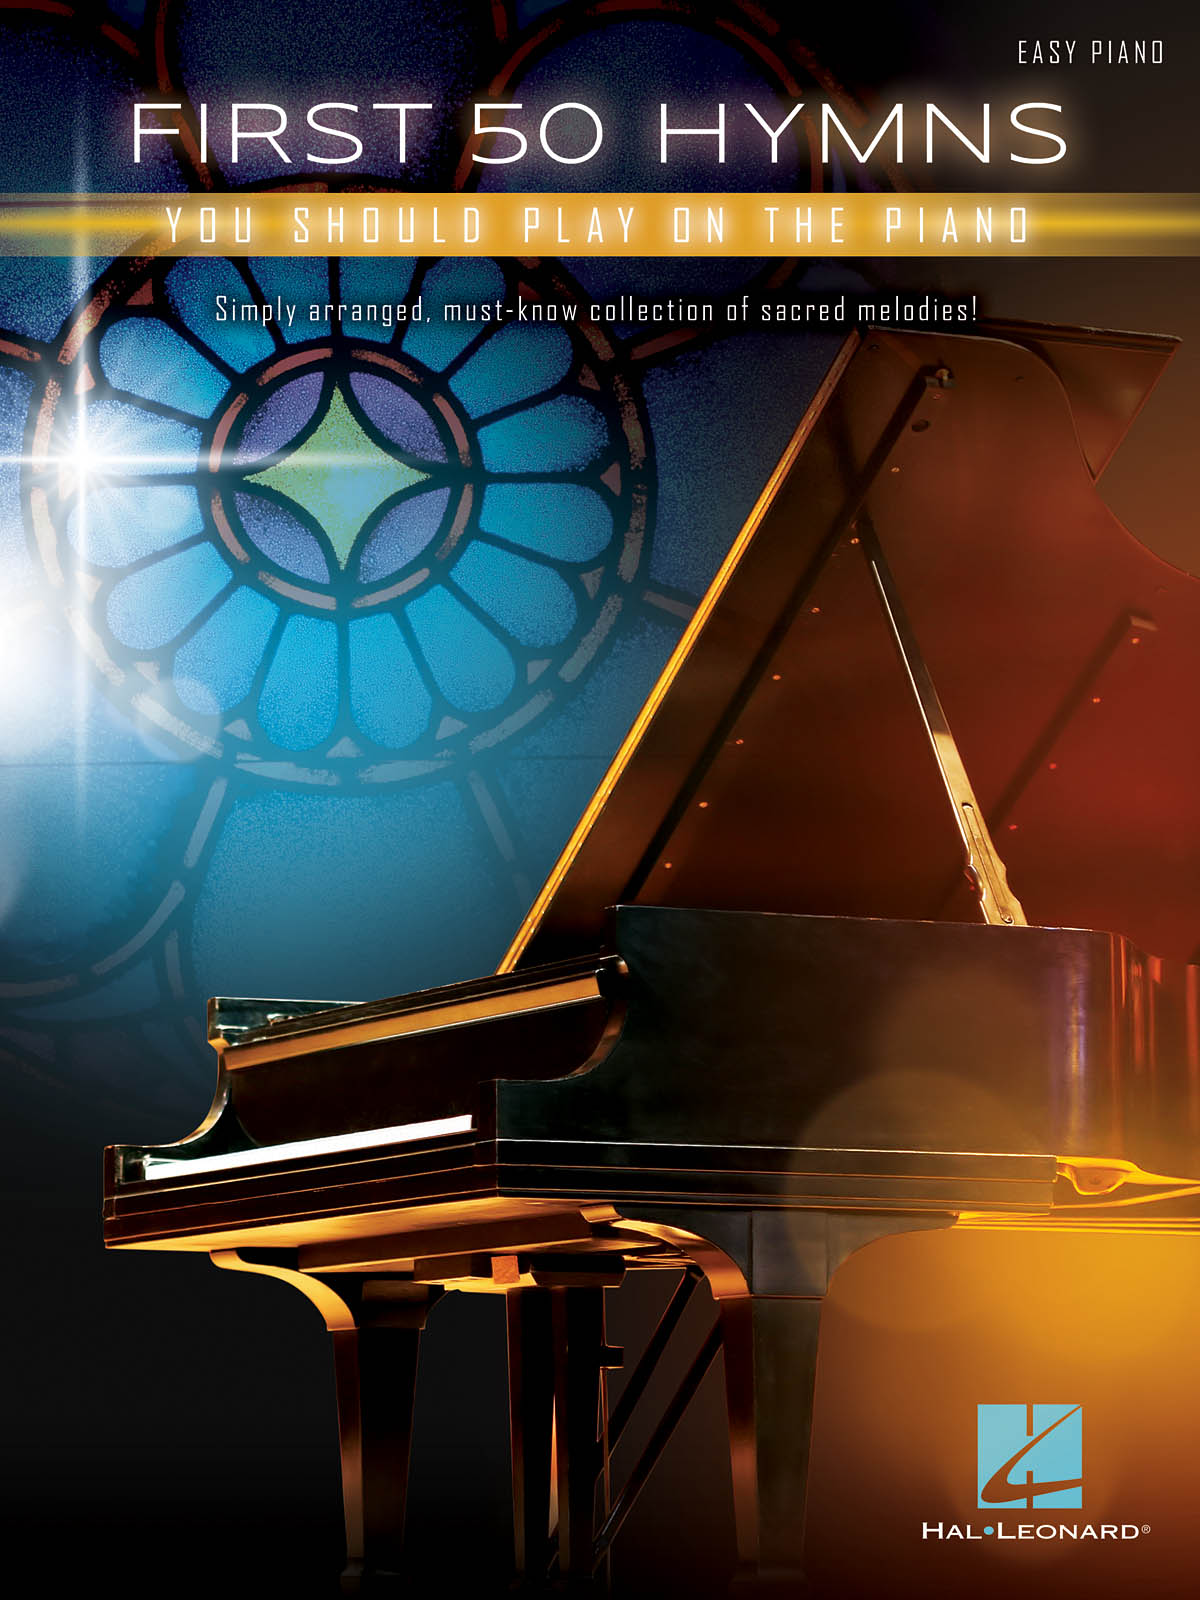 First 50 Hymns You Should Play on Piano - Easy Piano Songbook